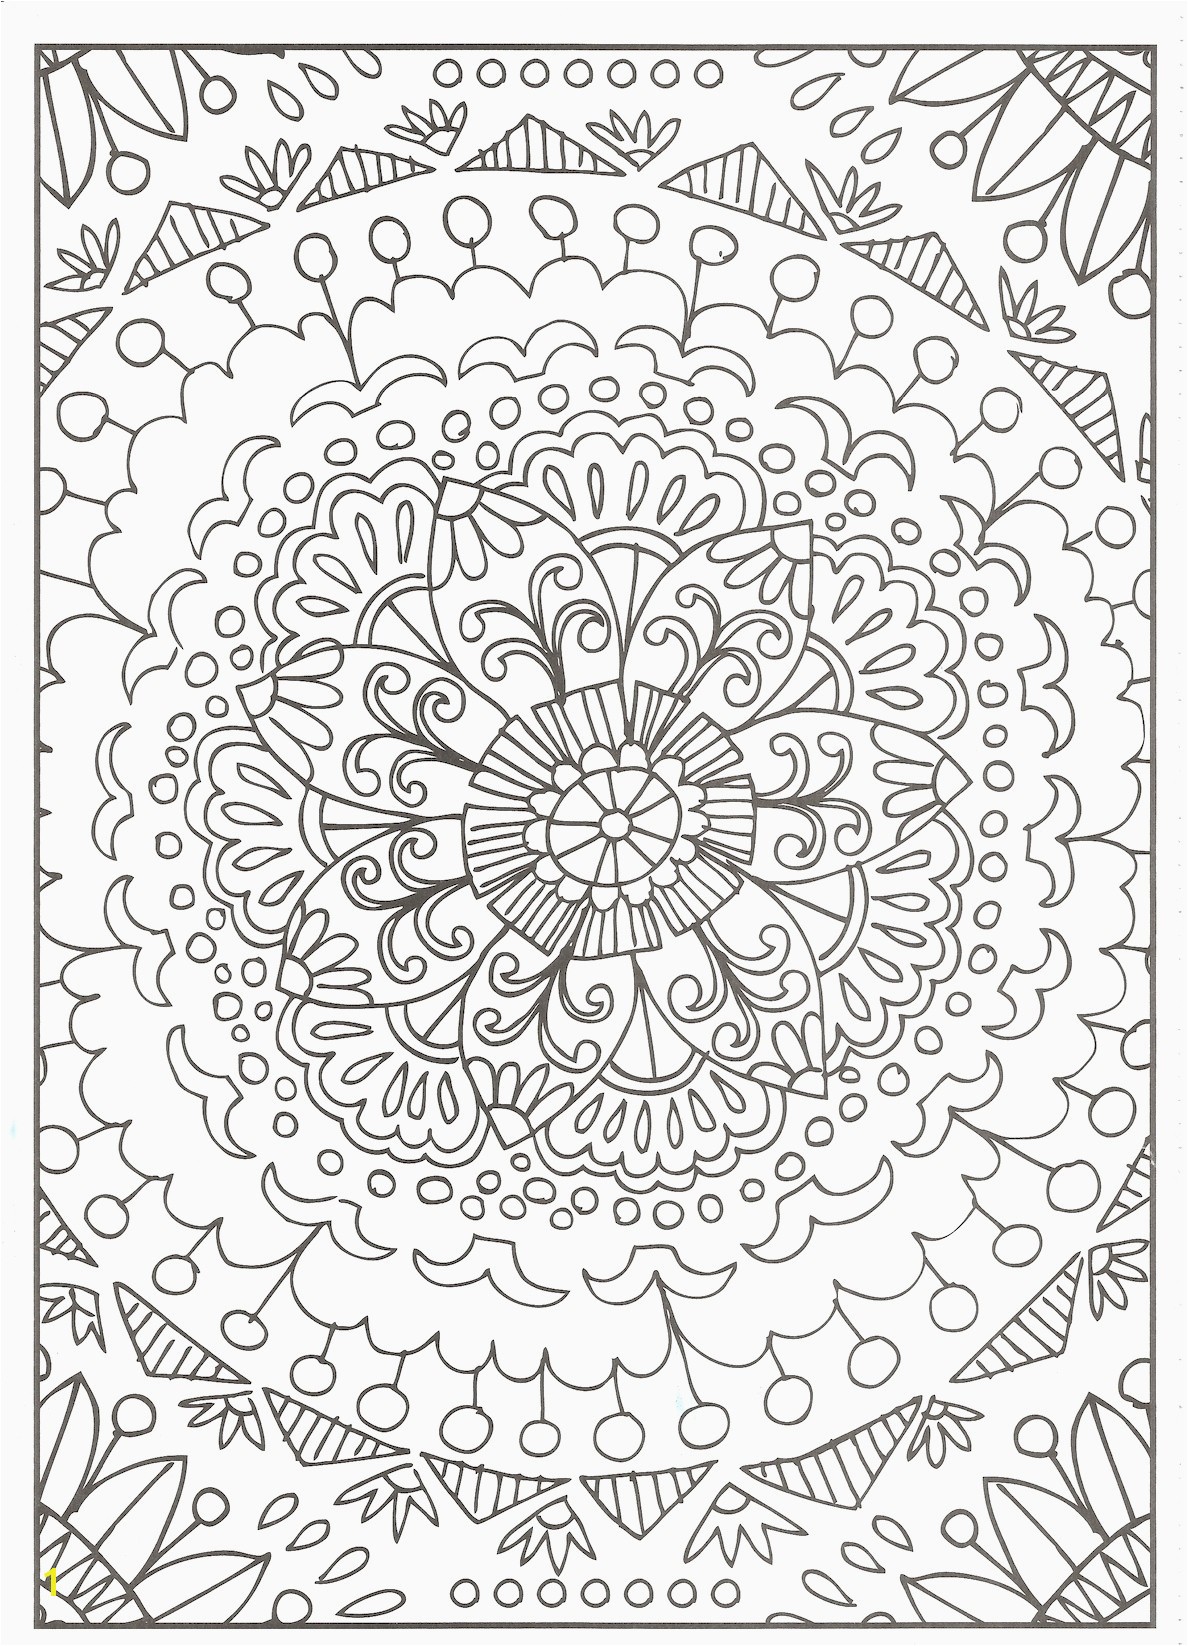 Coloring Pages for Adults Free Printable Free Printable Flower Coloring Pages for Adults Inspirational Cool